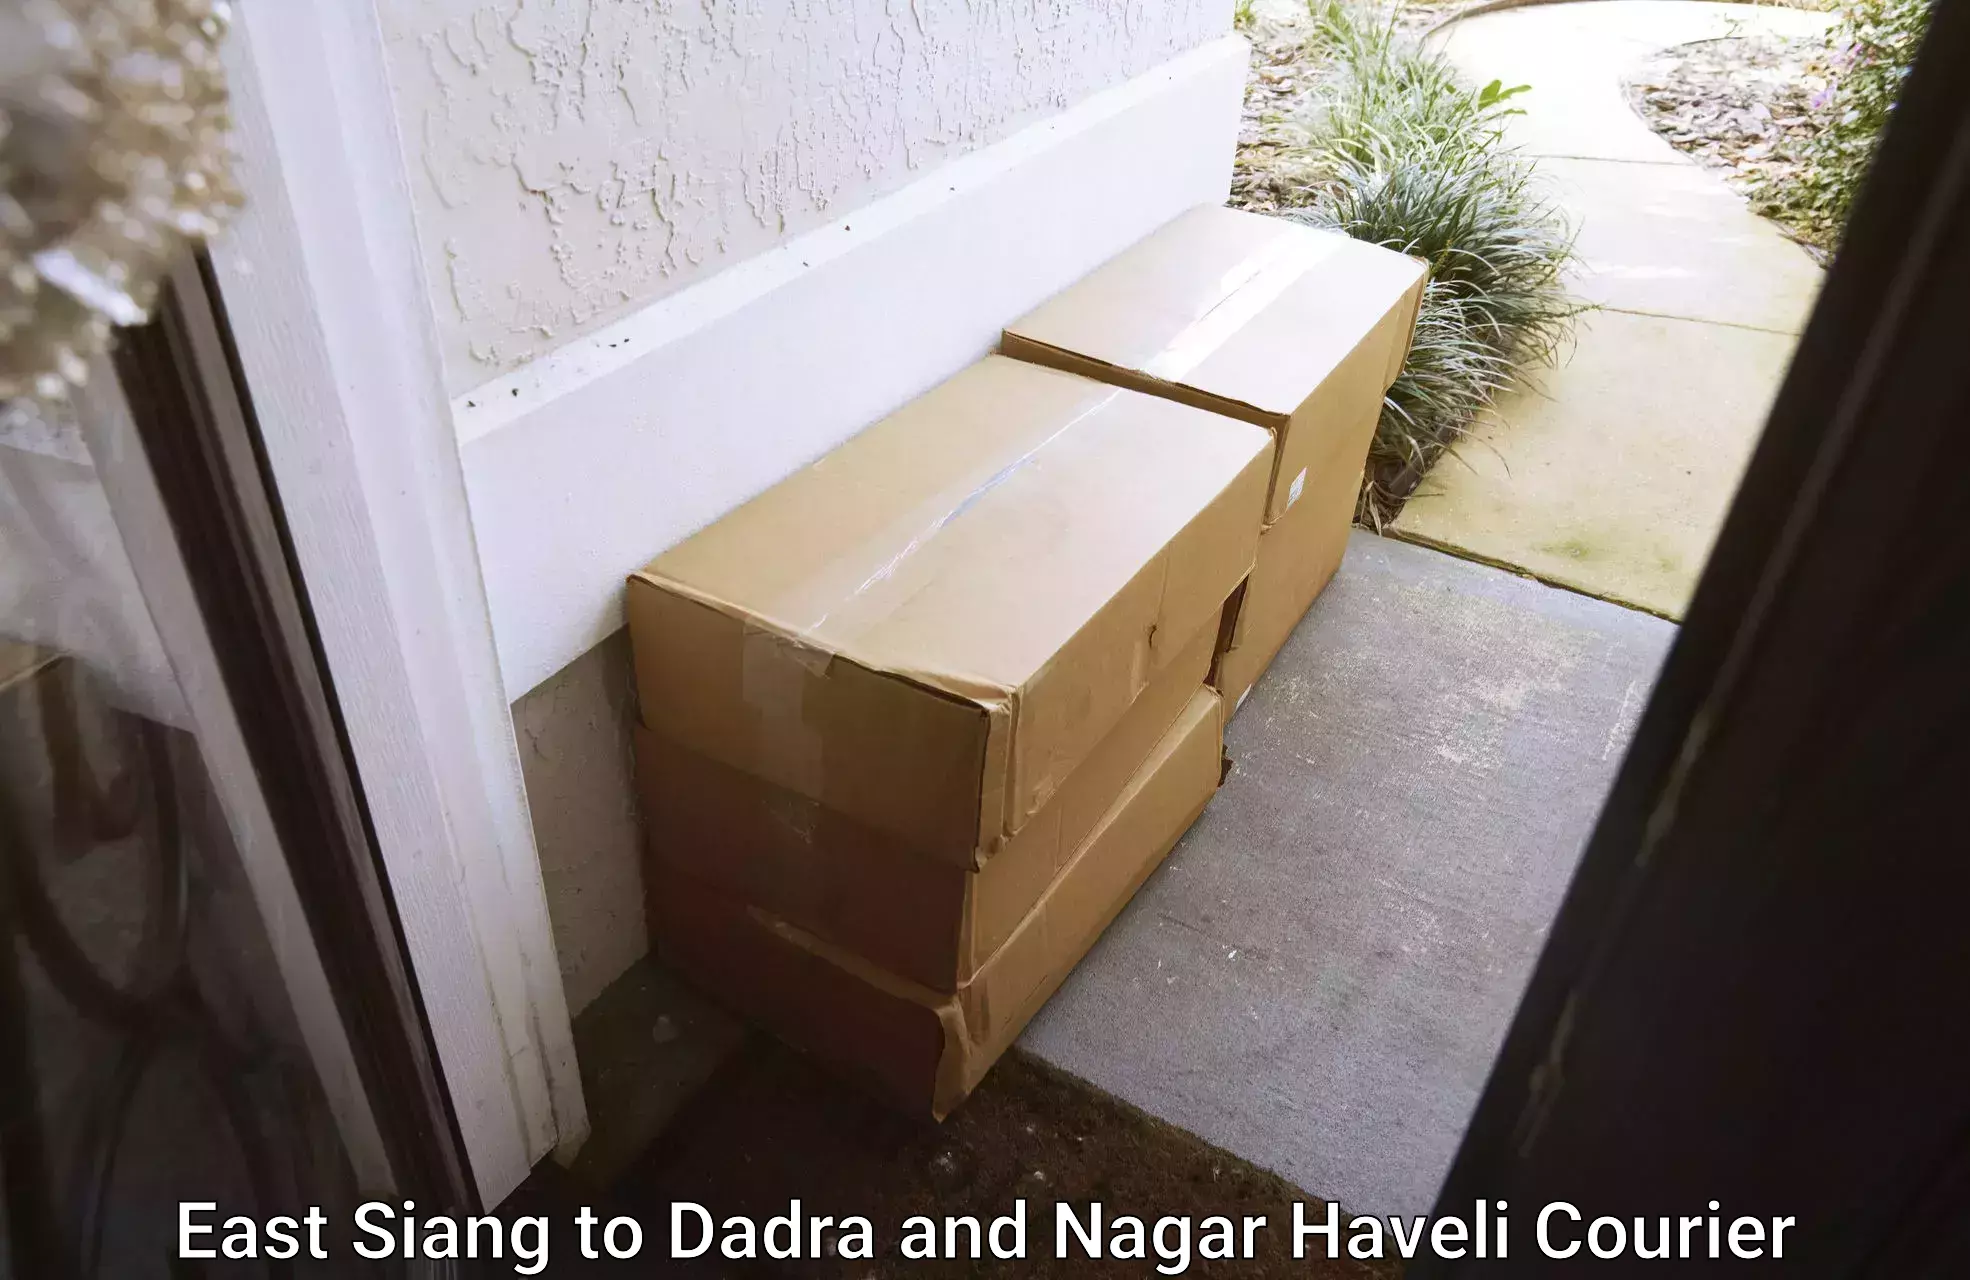 Expedited parcel delivery East Siang to Dadra and Nagar Haveli